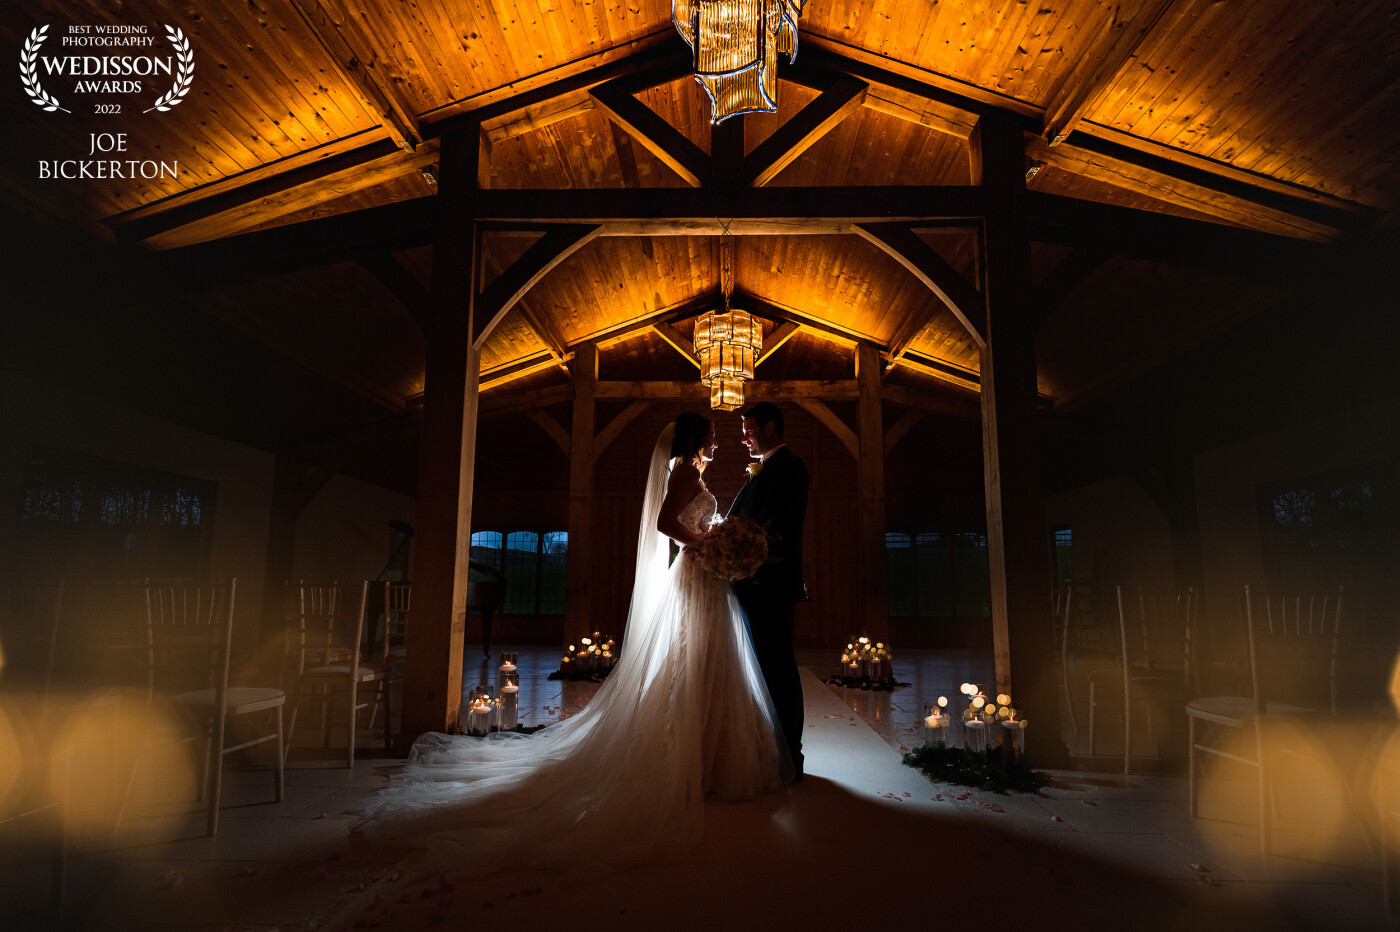 A simple OCF behind this couple at Colshaw Hall in Cheshire, England really enabled me to shoot at a low exposure revealing the intimacy of the candlelight and symmetry of the beautiful wedding barn lighting.